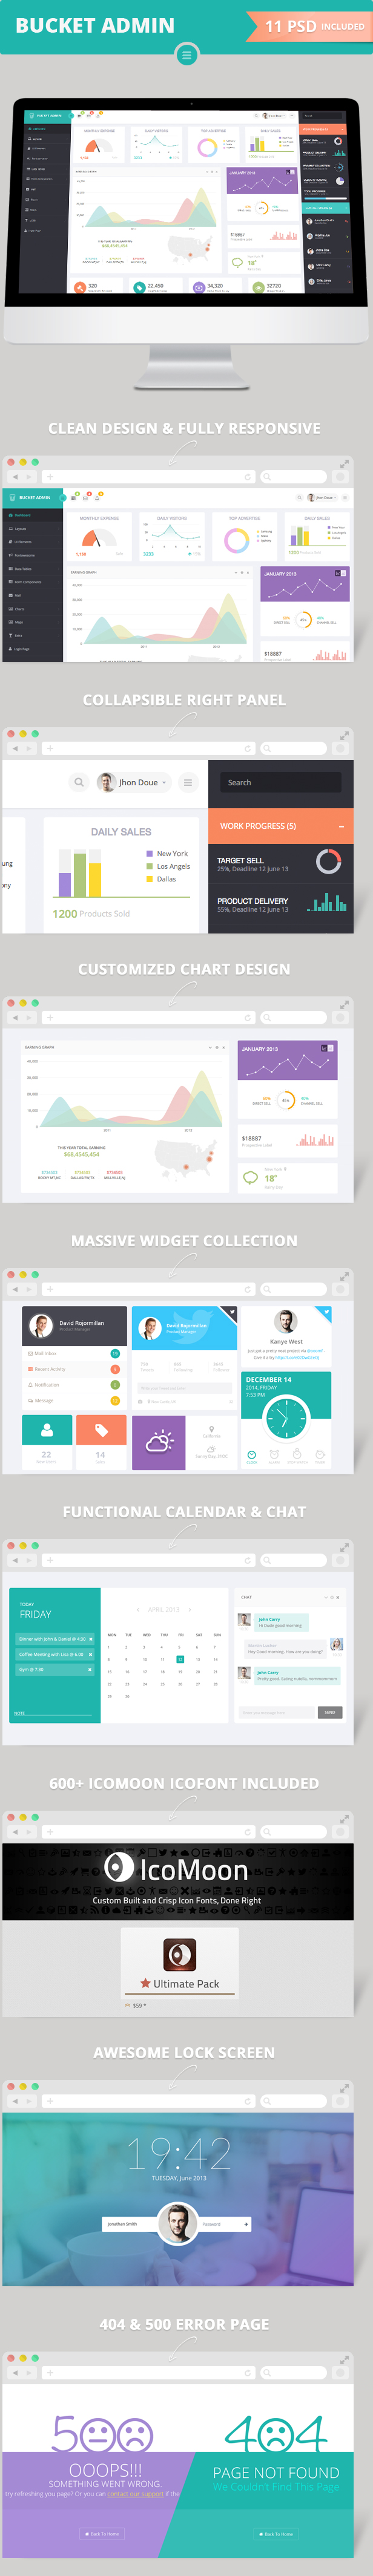 profile featuredescription by themebucket d73s68s - Bucket Admin Bootstrap 3 Responsive Flat Dashboard